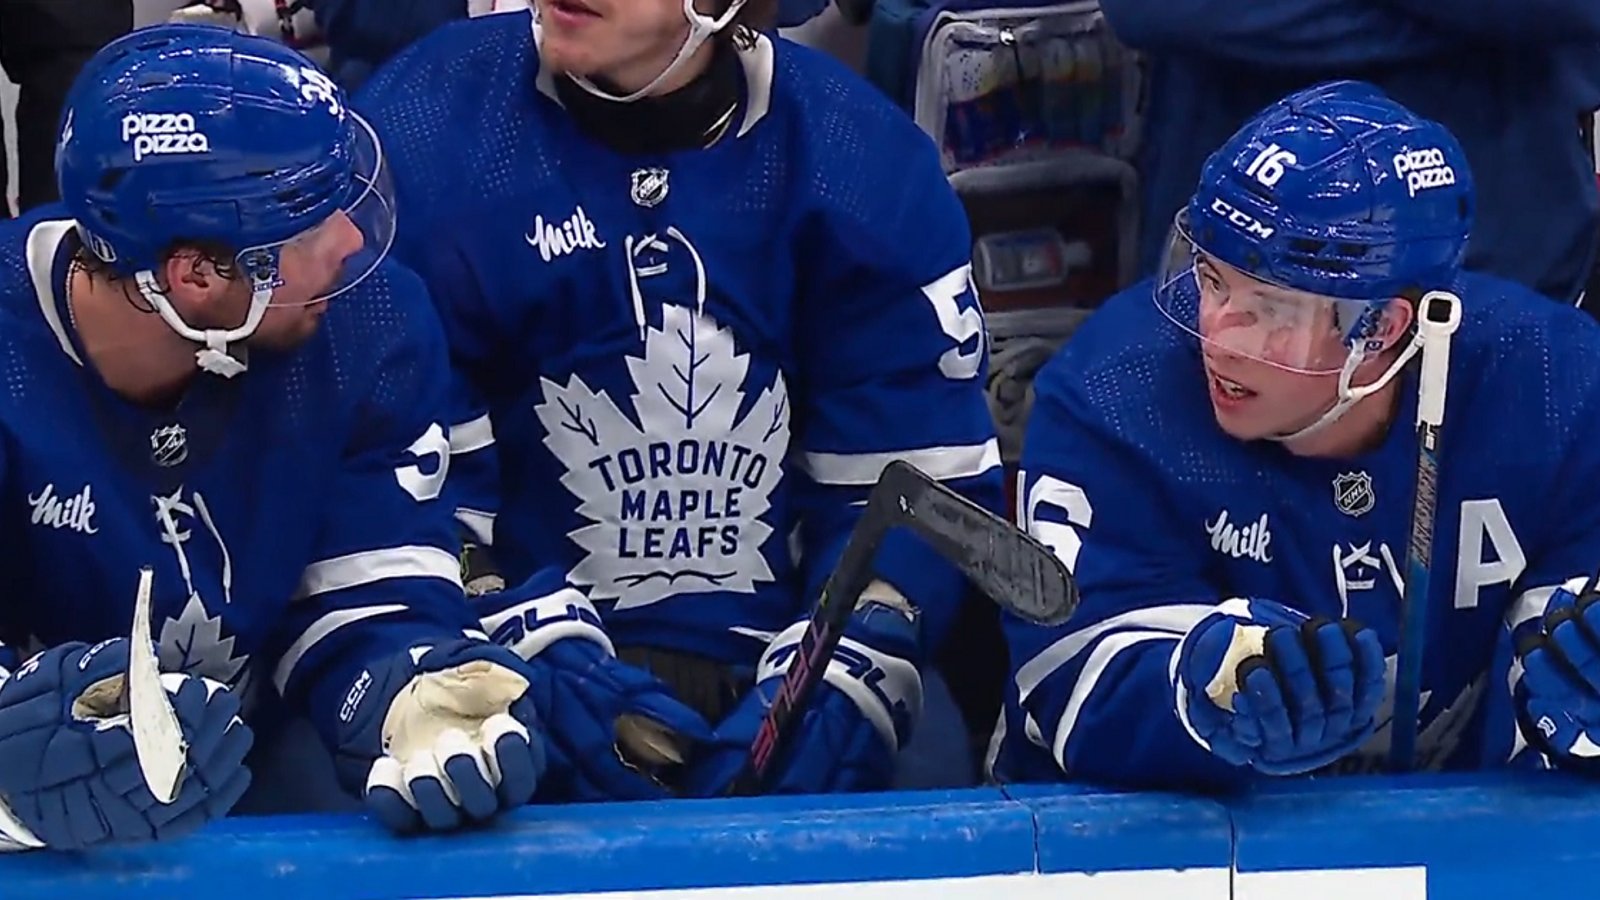 Cracks begin to show on the Maple Leafs bench in Game 4.